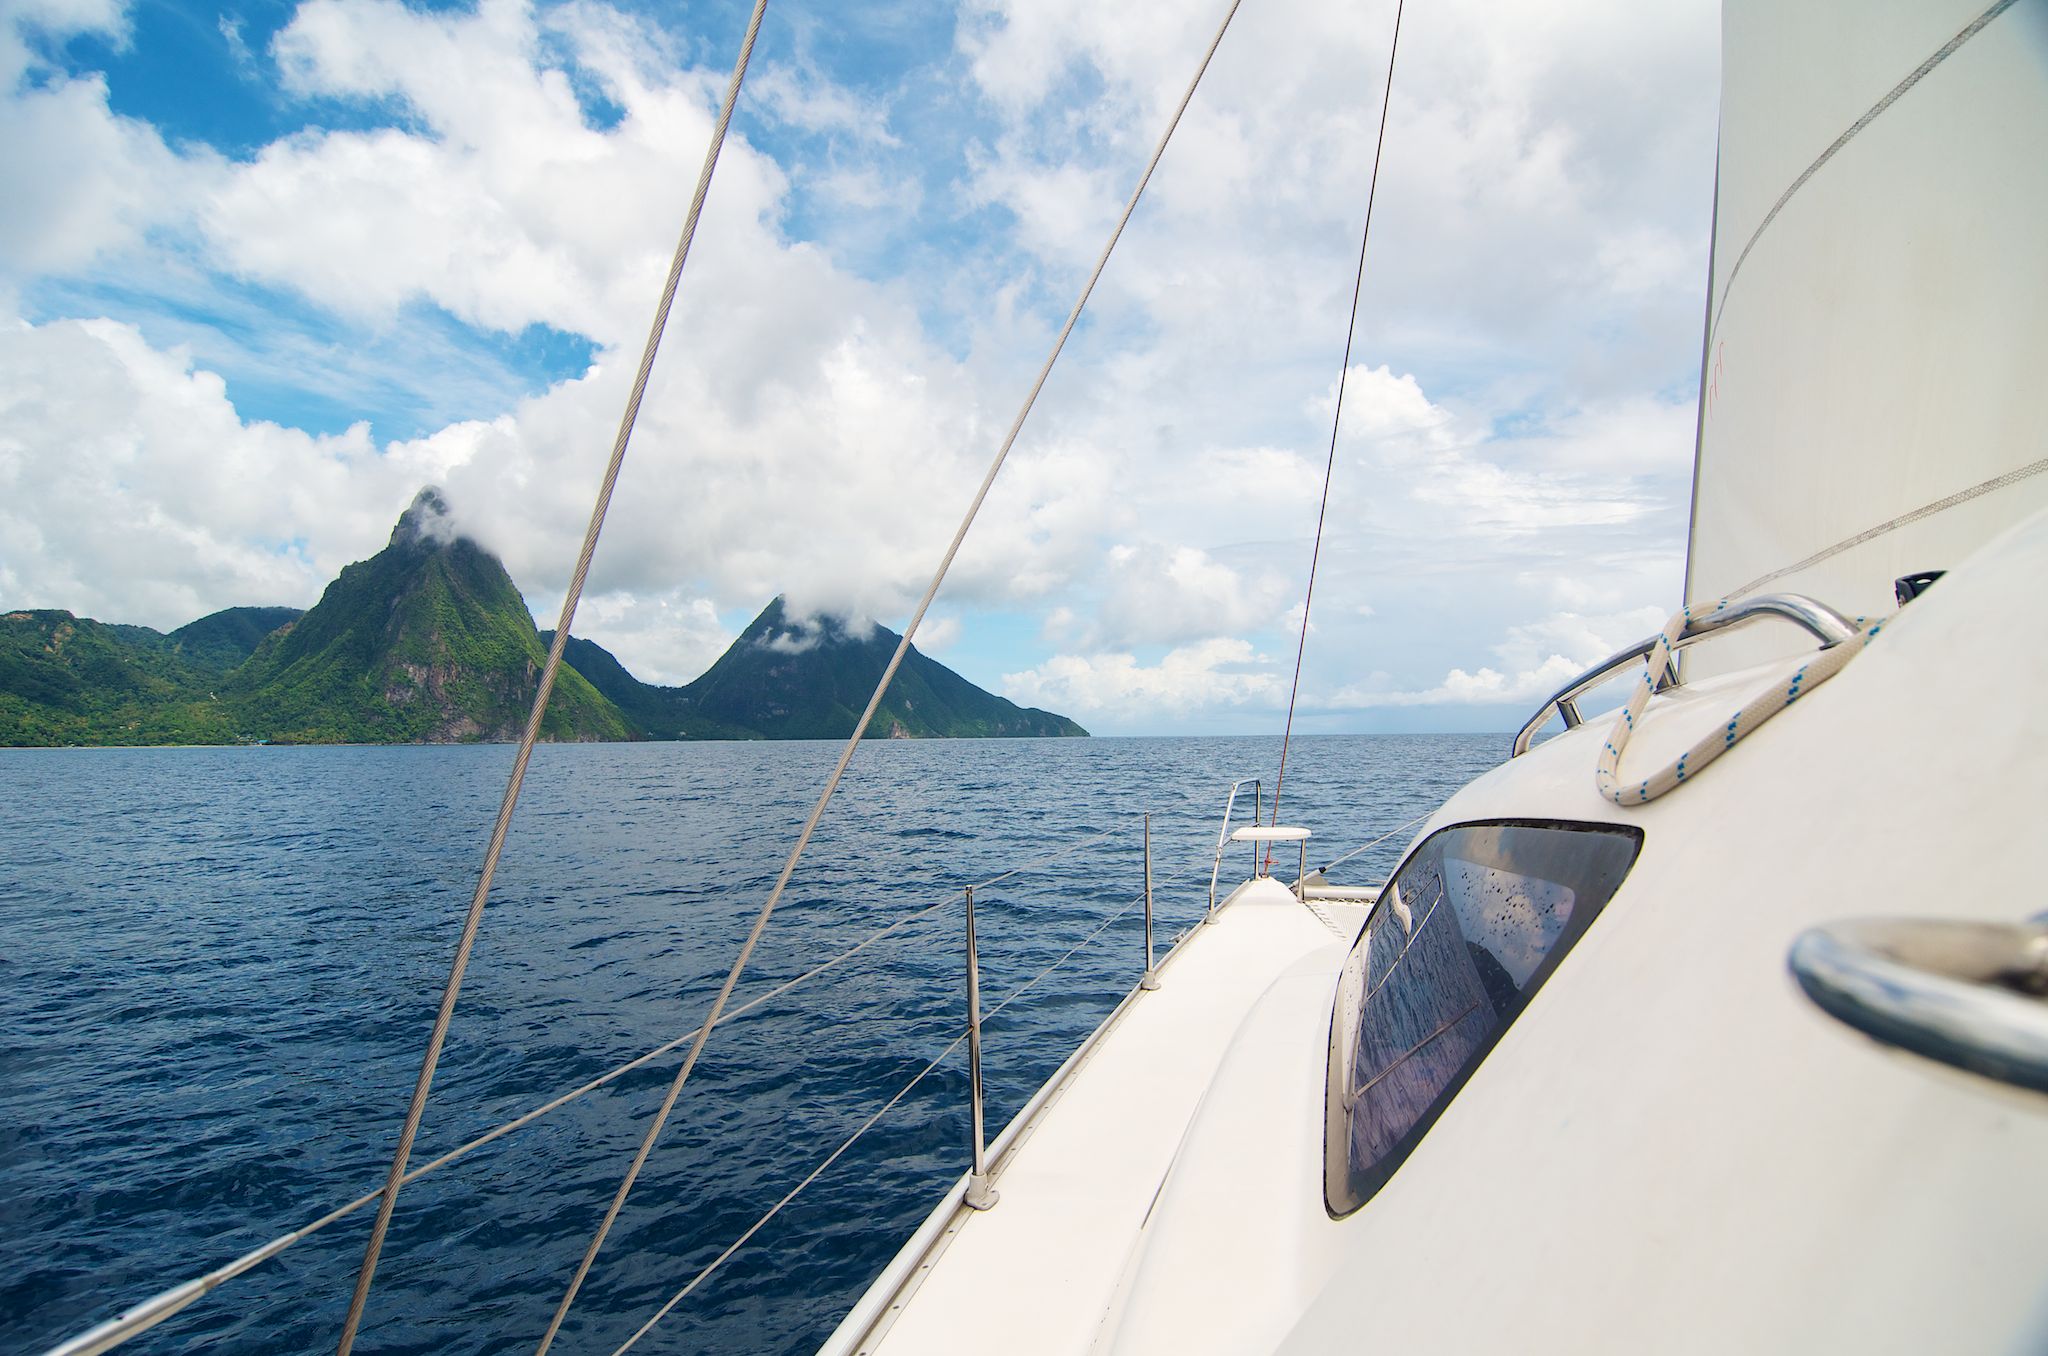 Sailing The Grenadines Part 2: Passing the Pitons and on to Bequia